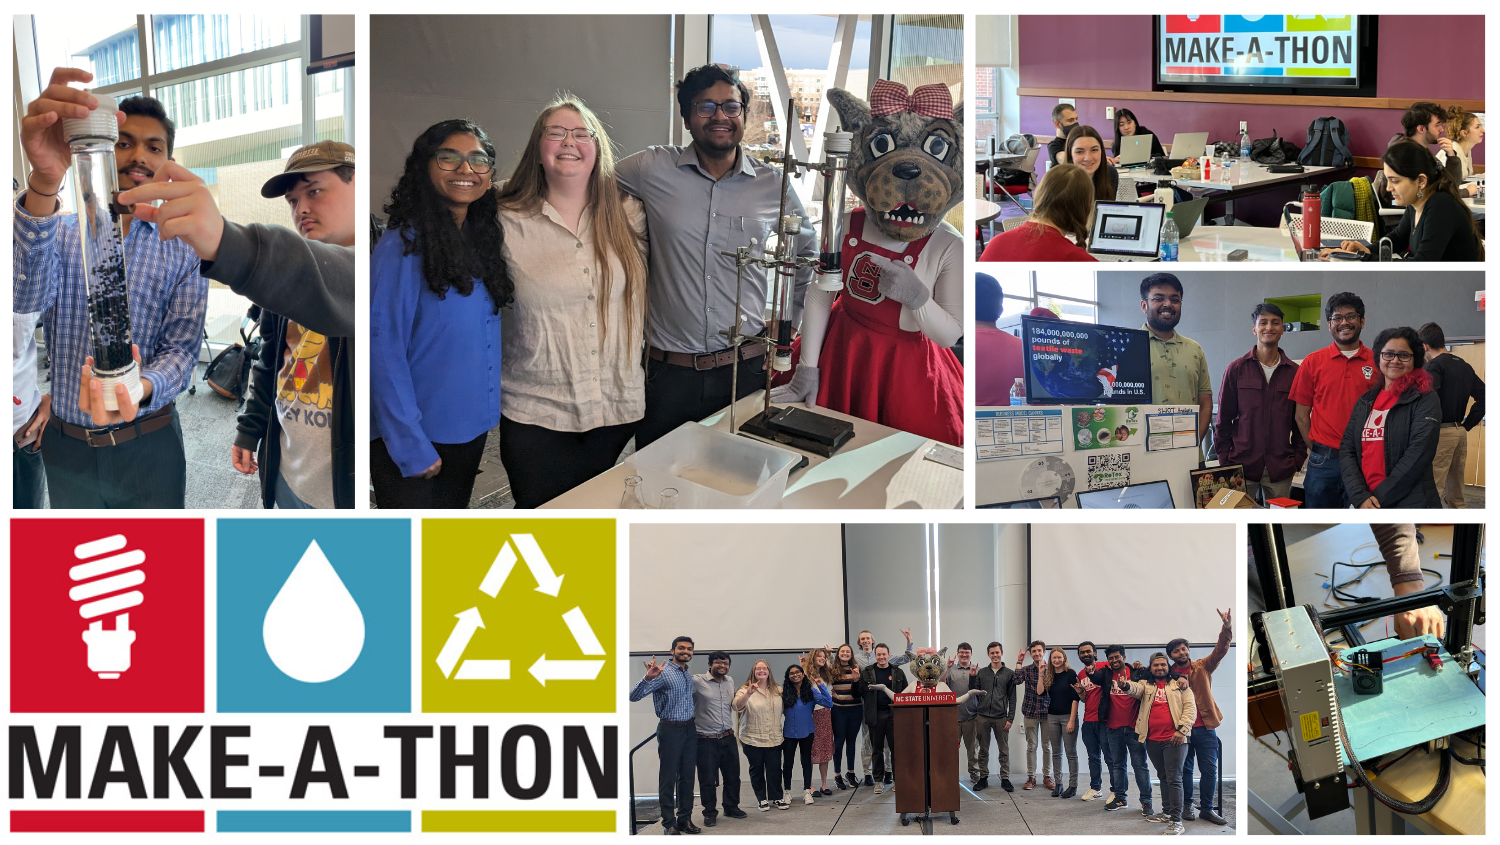 Collage photos of students at Make-A-Thon event showcasing their innovations and projects.